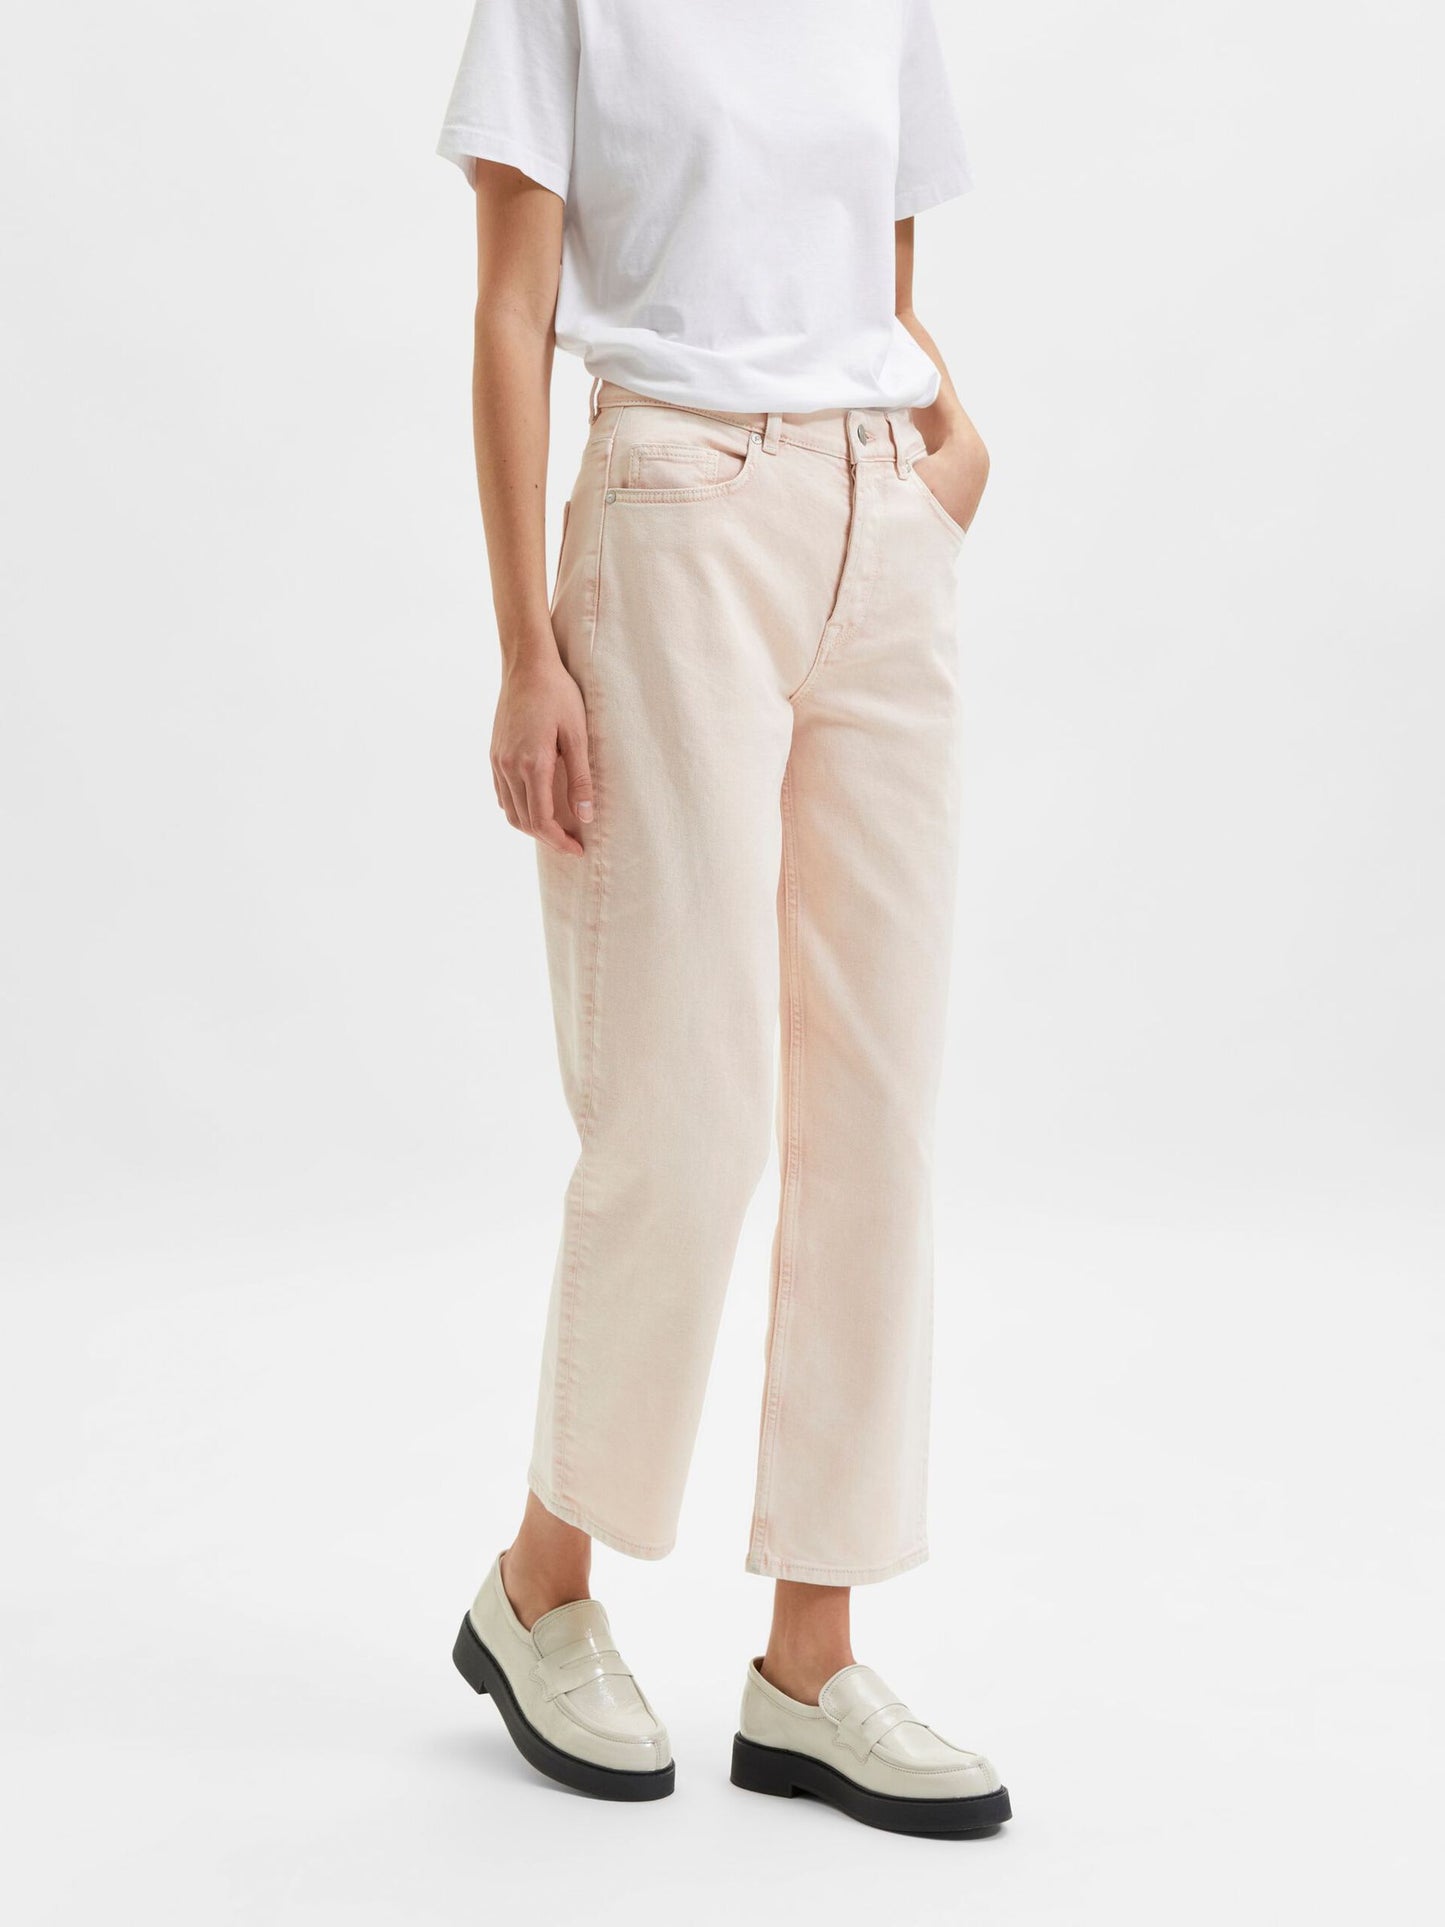 Peach Whip Jeans - Selected Femme